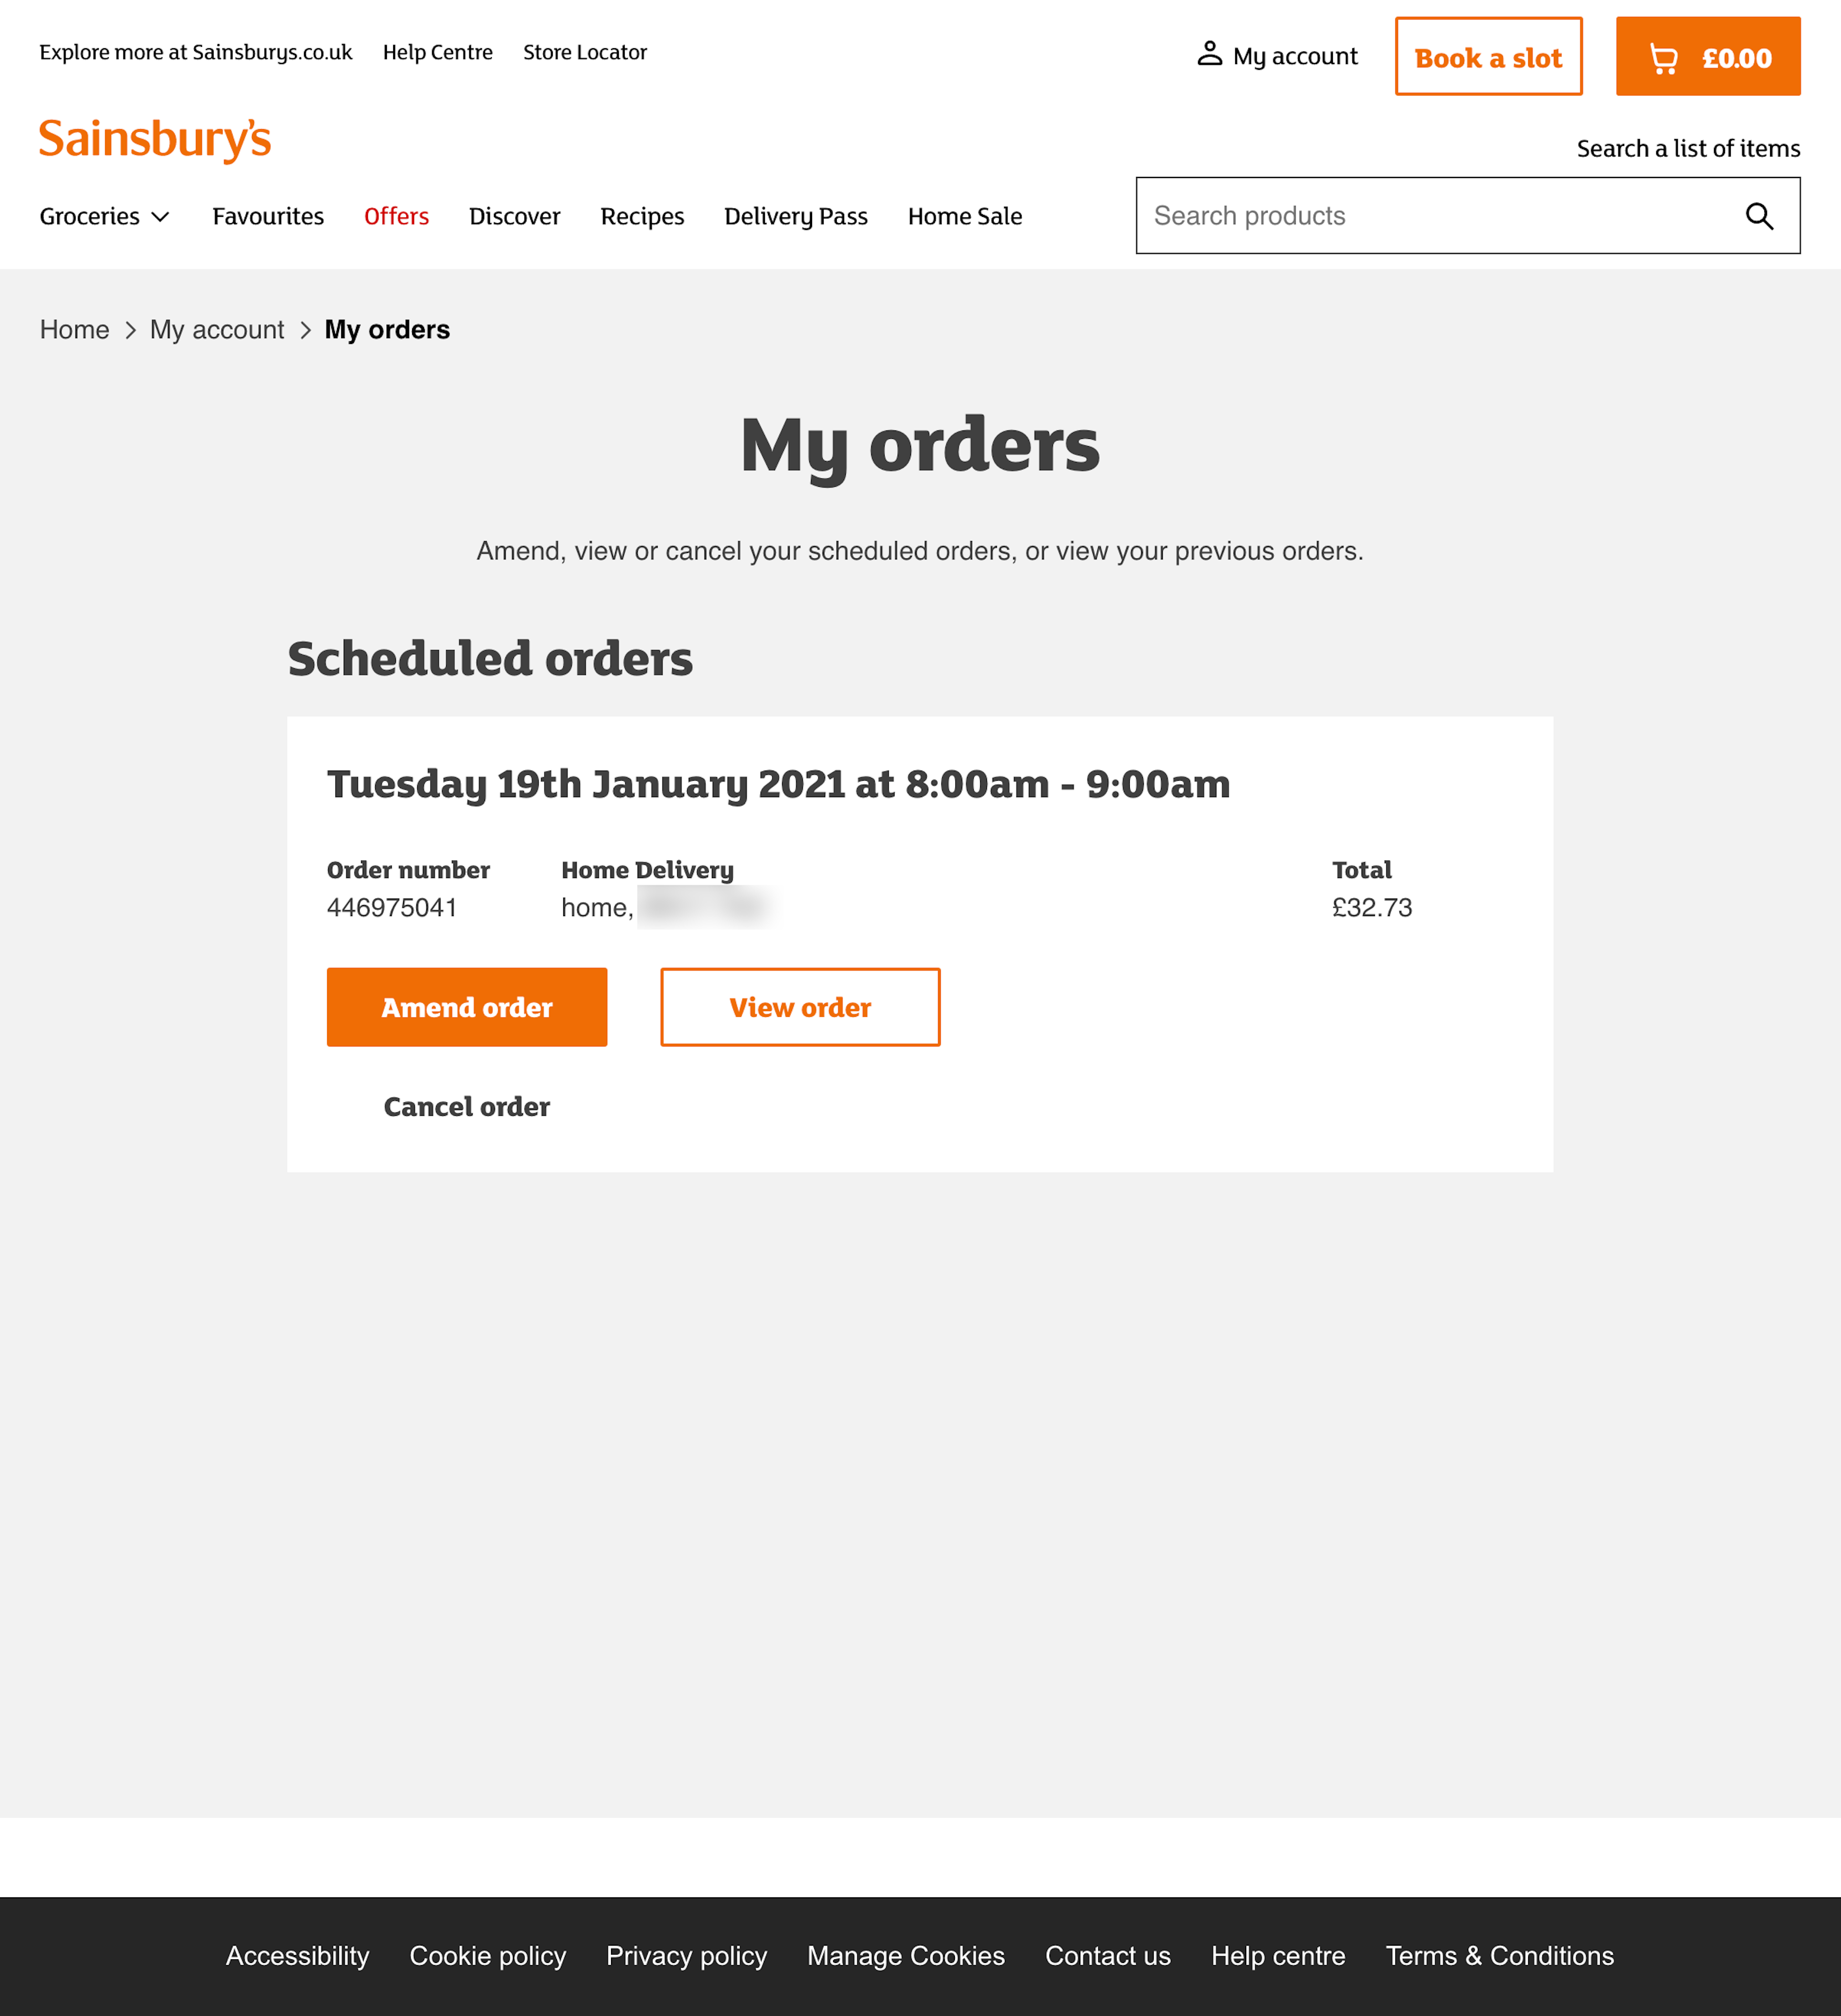 https://baymard-assets.imgix.net/benchmark_webpages/screenshots/7422/original/sainsbury-s-orders-overview.png?w=3840&h=3840&auto=format&q=50&fit=crop&crop=focalpoint&fp-x=0.5&fp-y=0